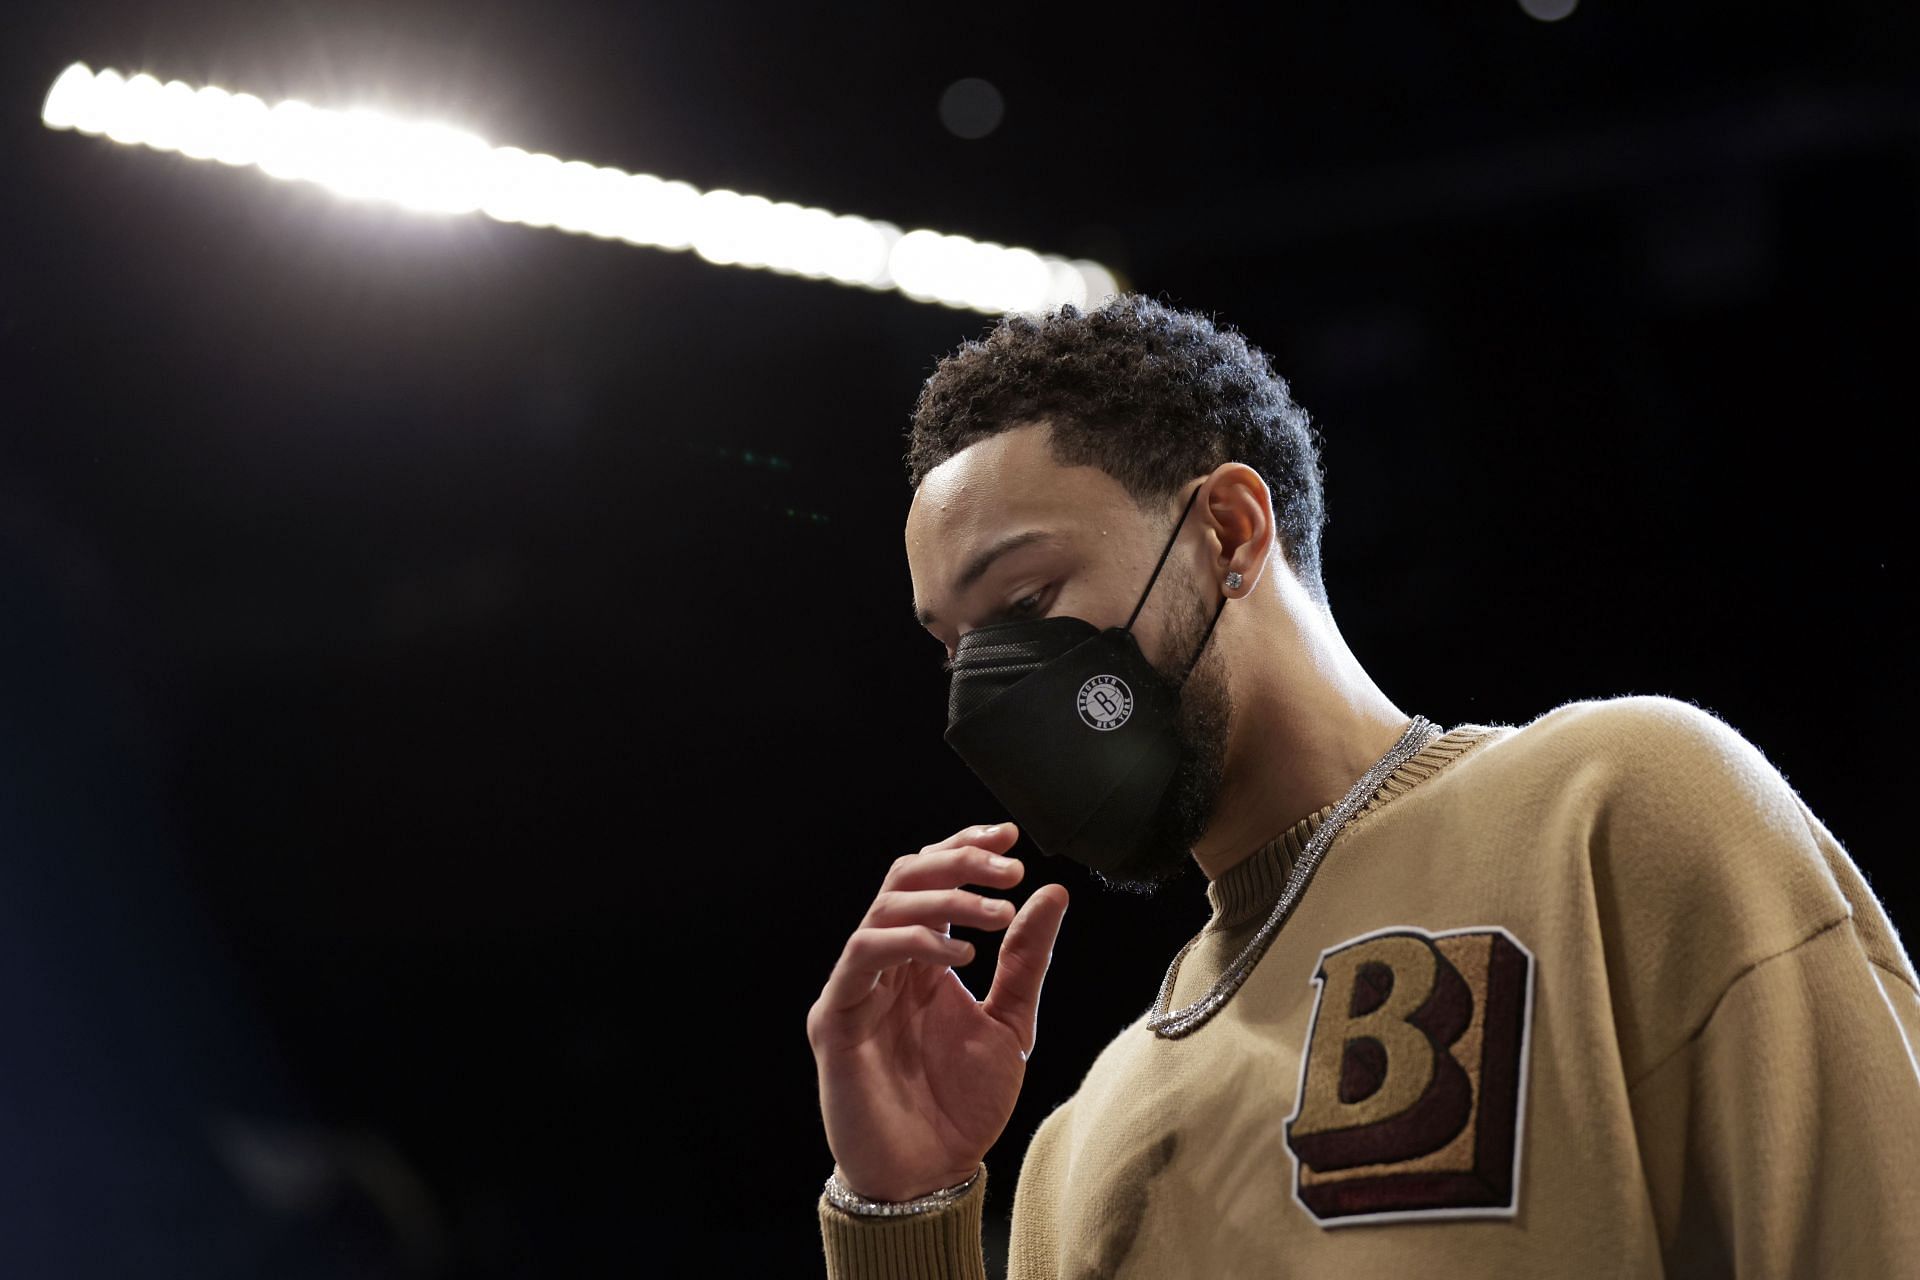 Ben Simmons is expected to play for the Brooklyn Nets soon after the All-Star break